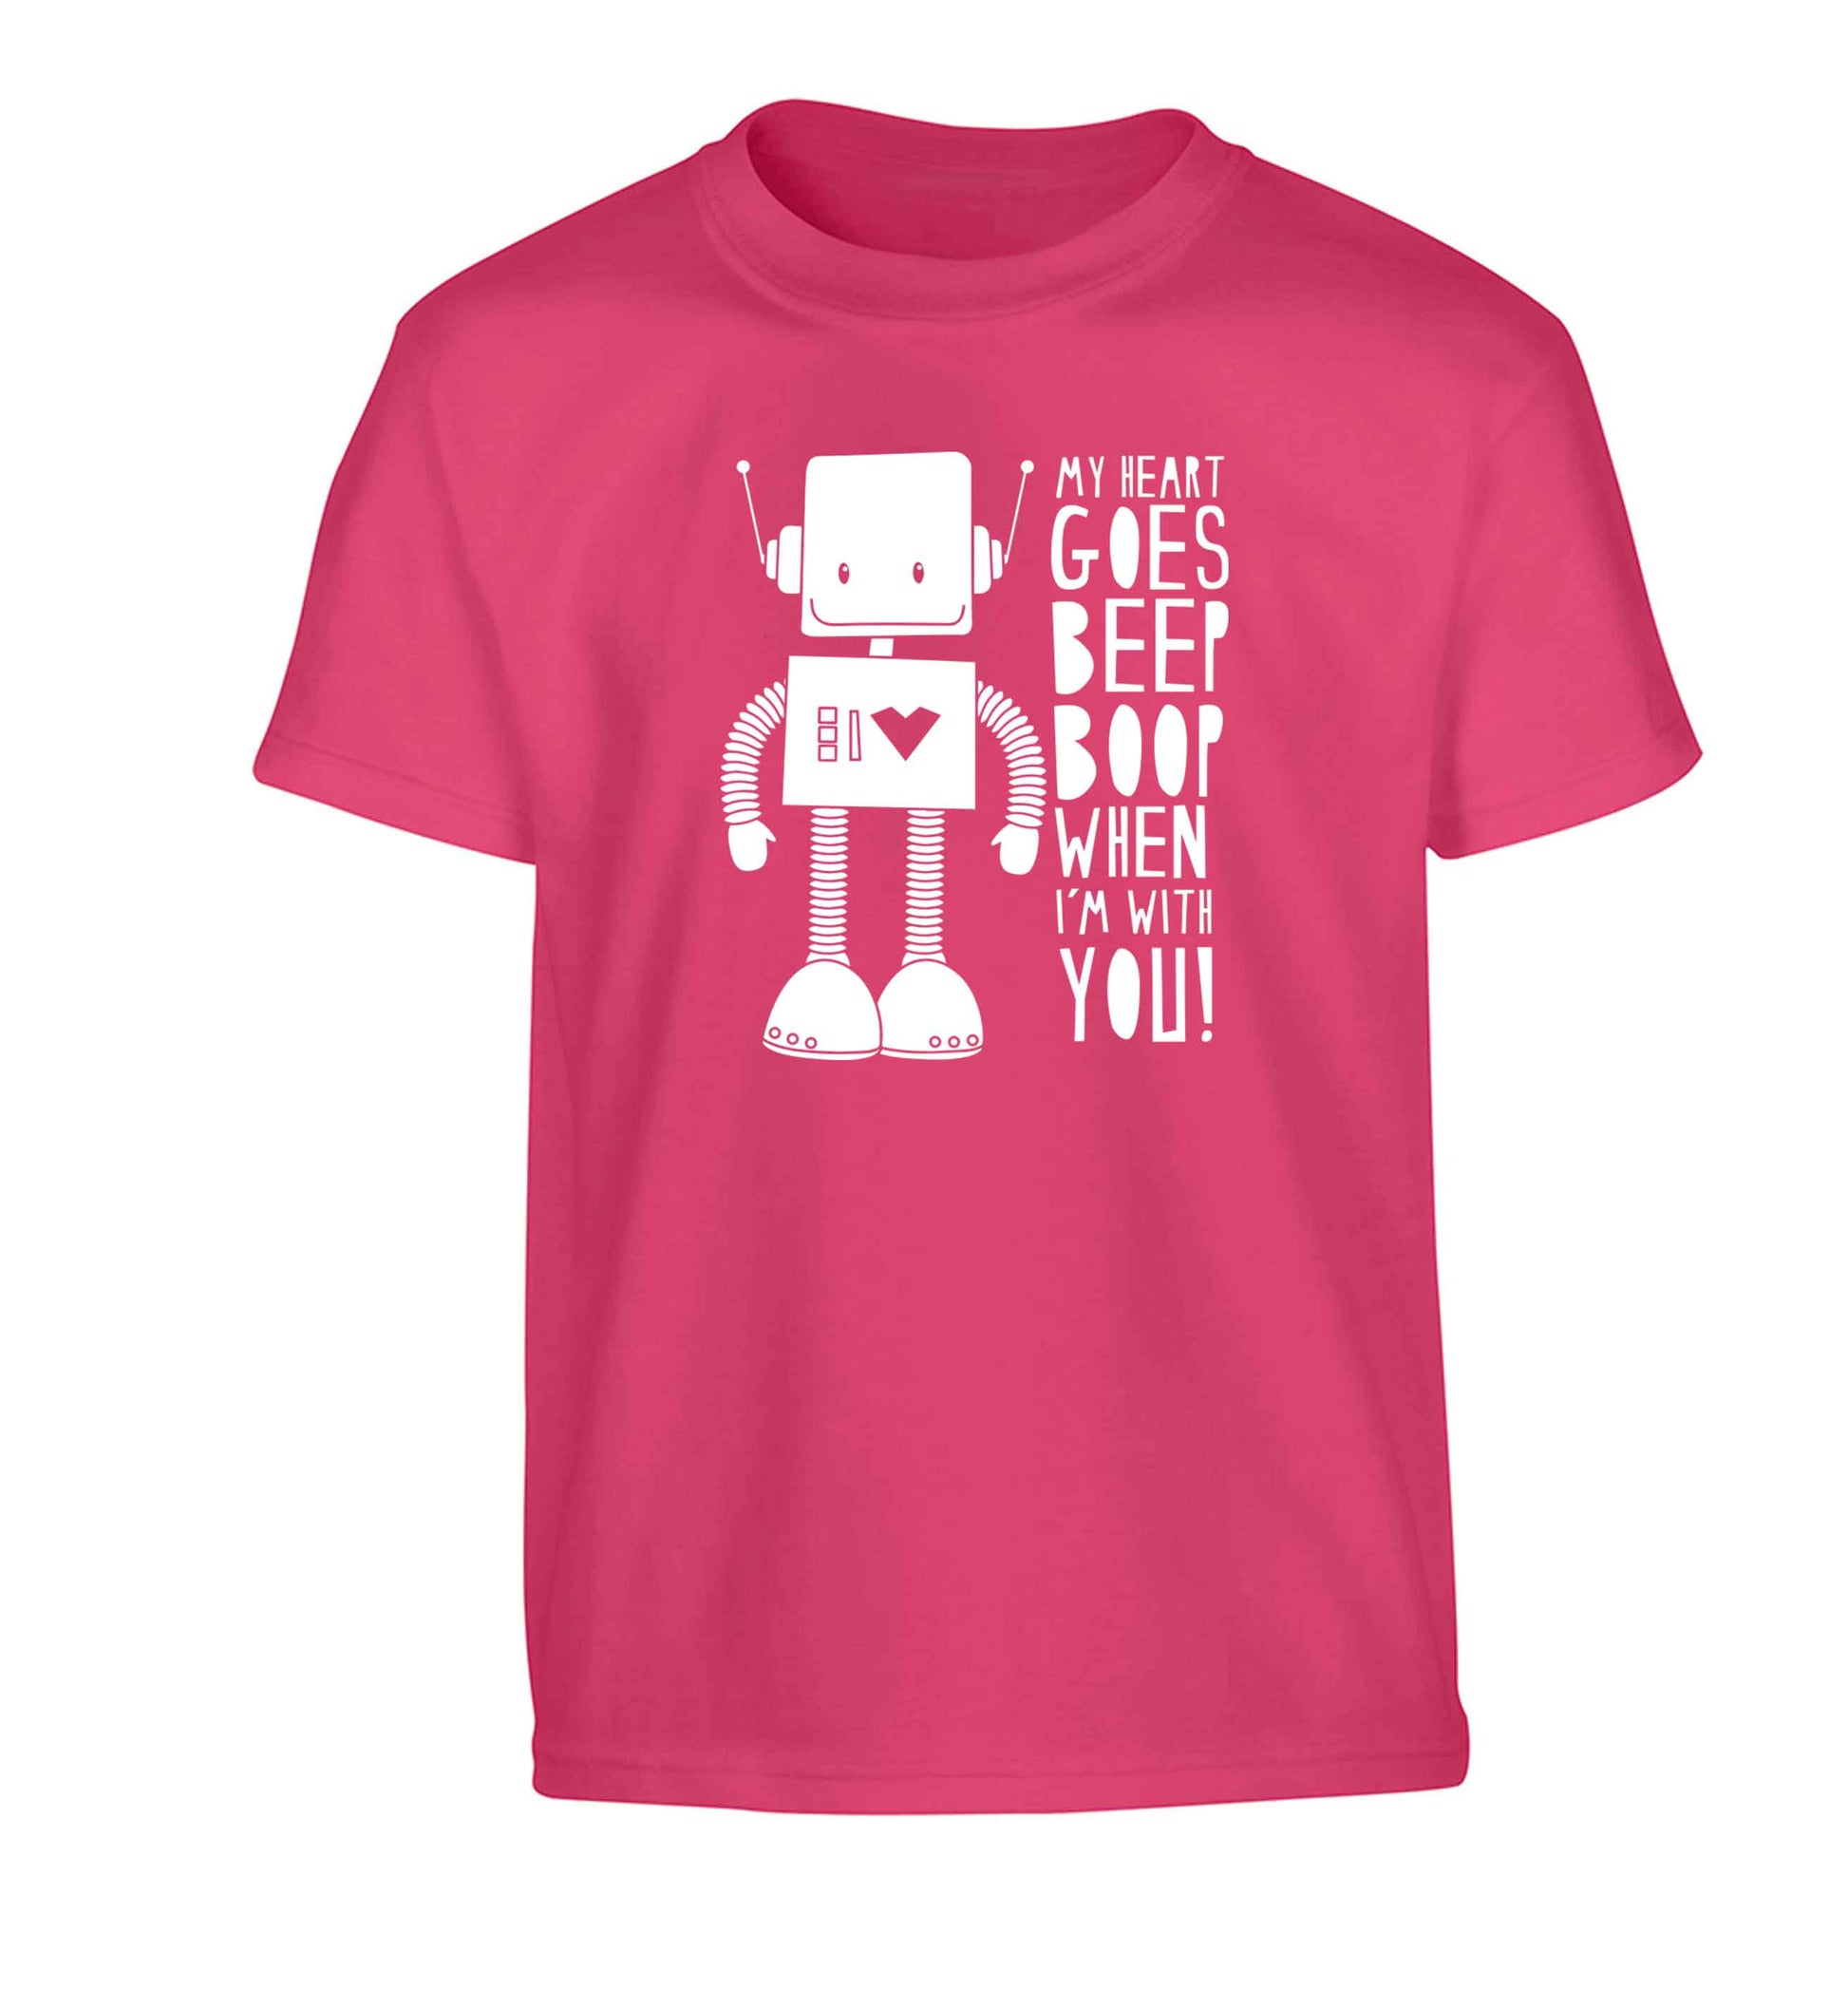 My heart goes beep boop when I'm with you Children's pink Tshirt 12-13 Years